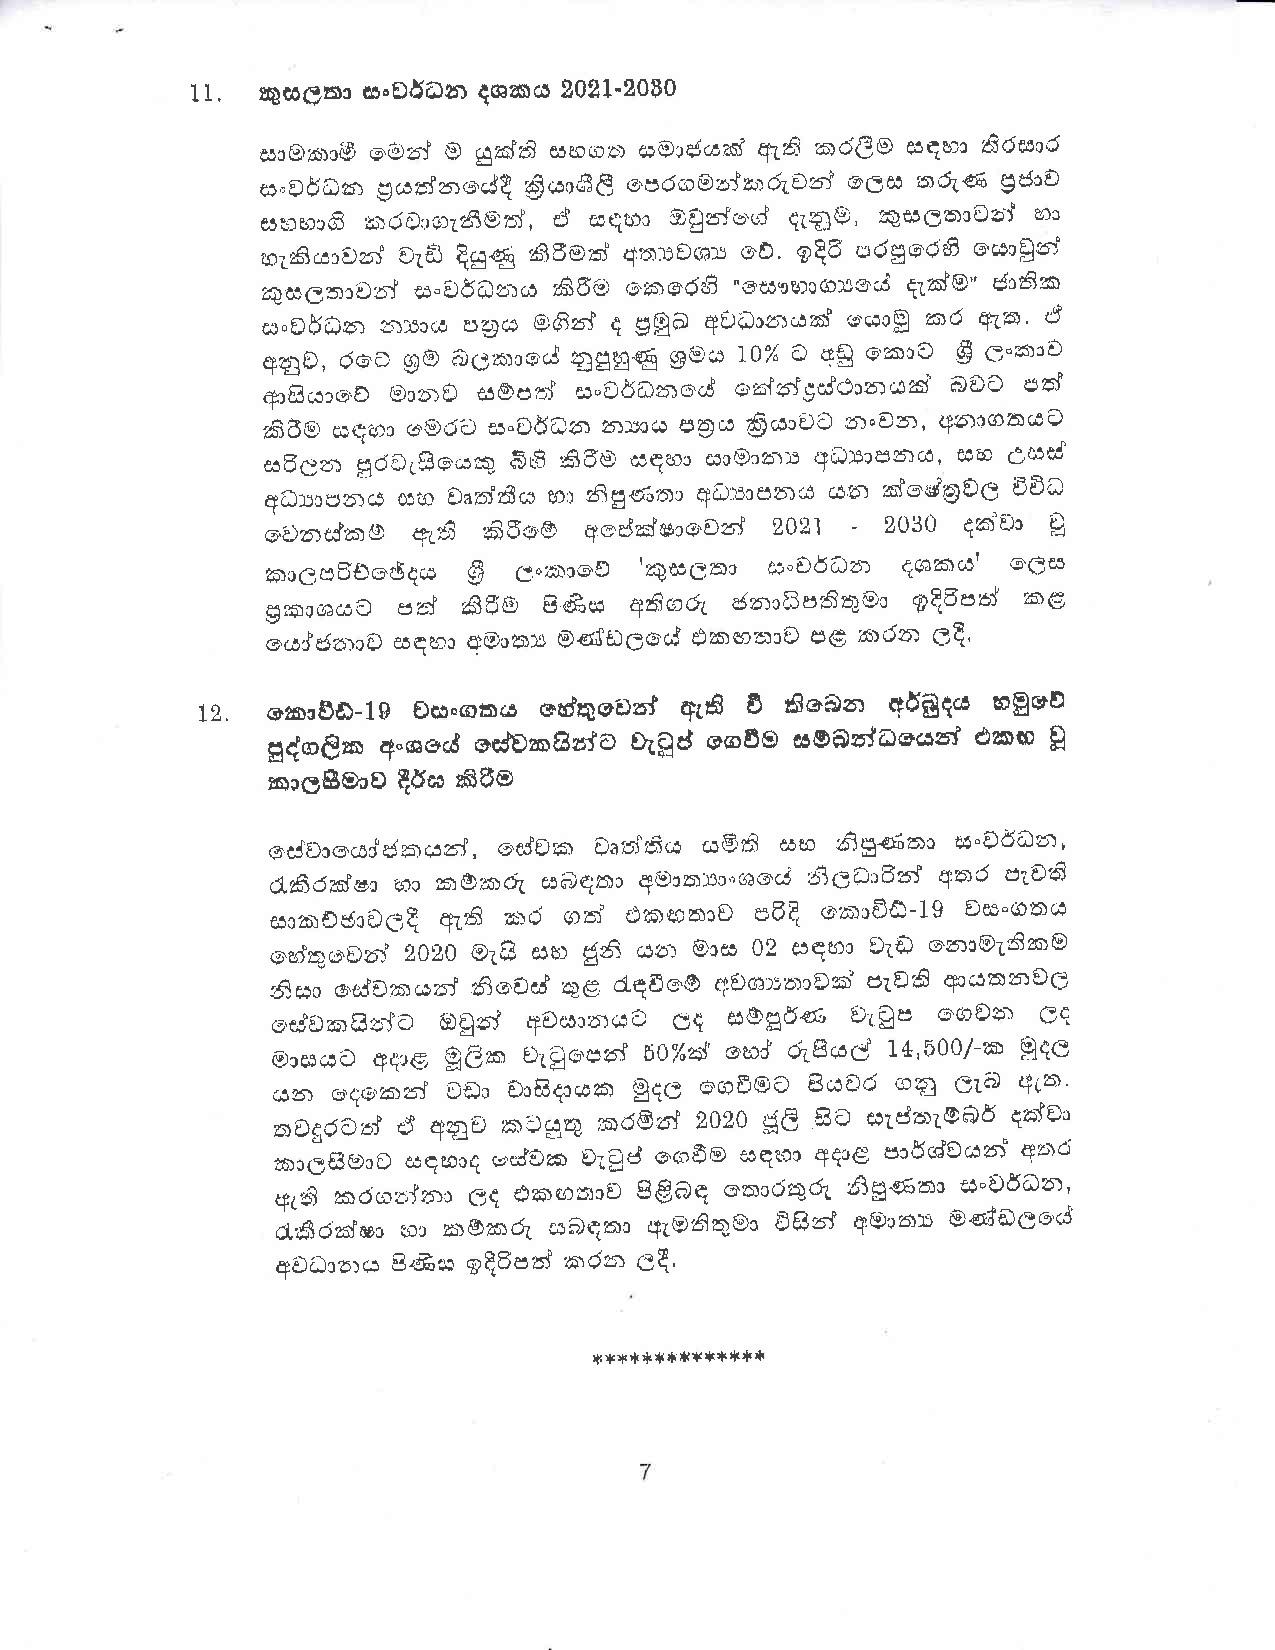 Cabinet Decision on 15.07.2020 page 007